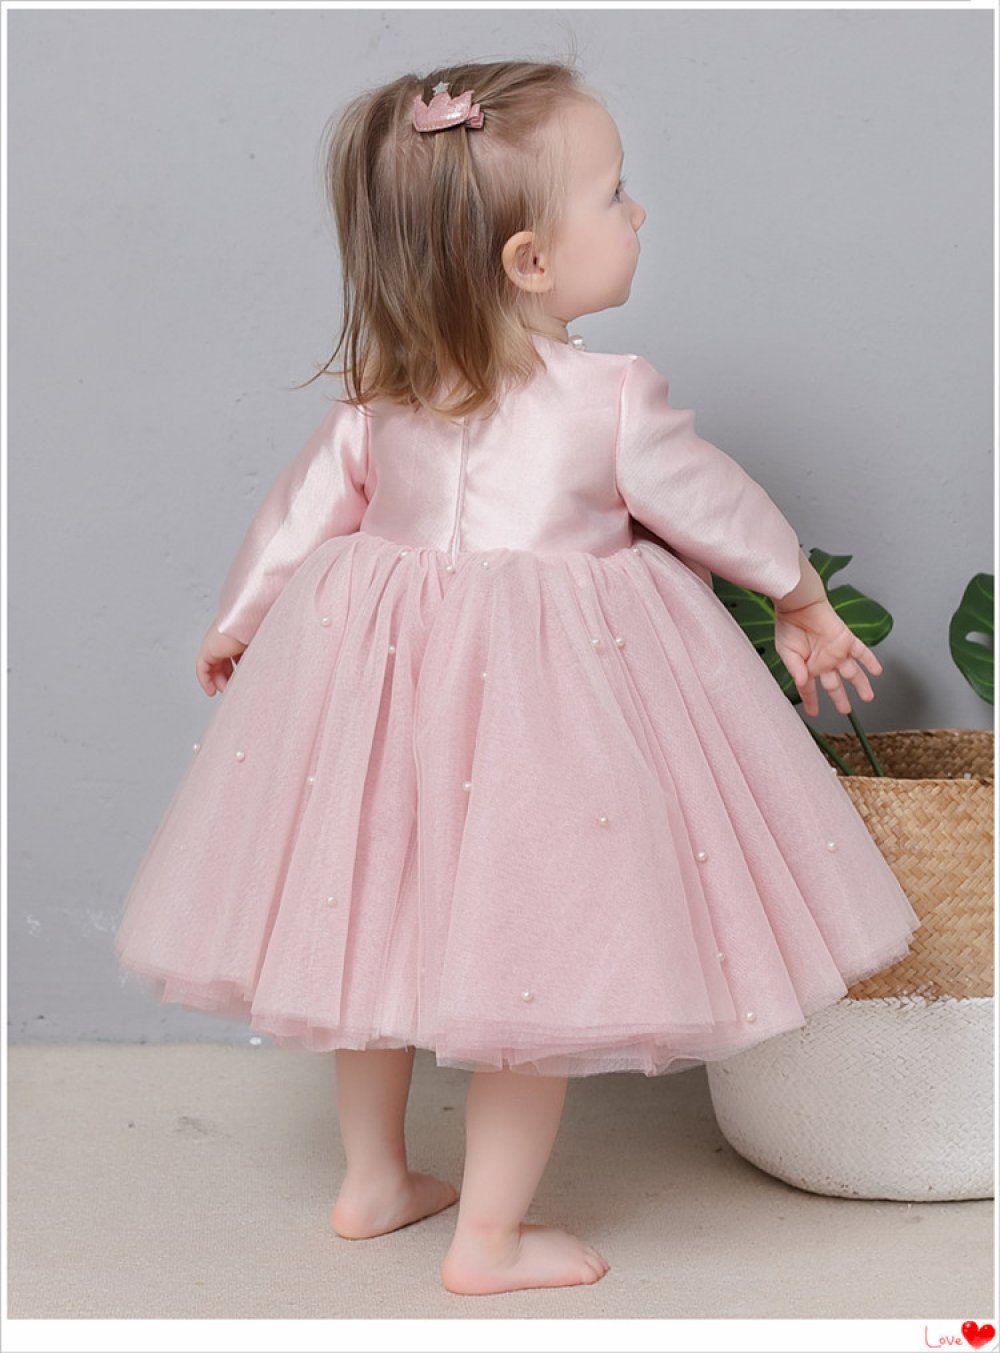 One-year-old Dress Girl Baby 100-day Dress Birthday Dress Wholesale Girls Clothes